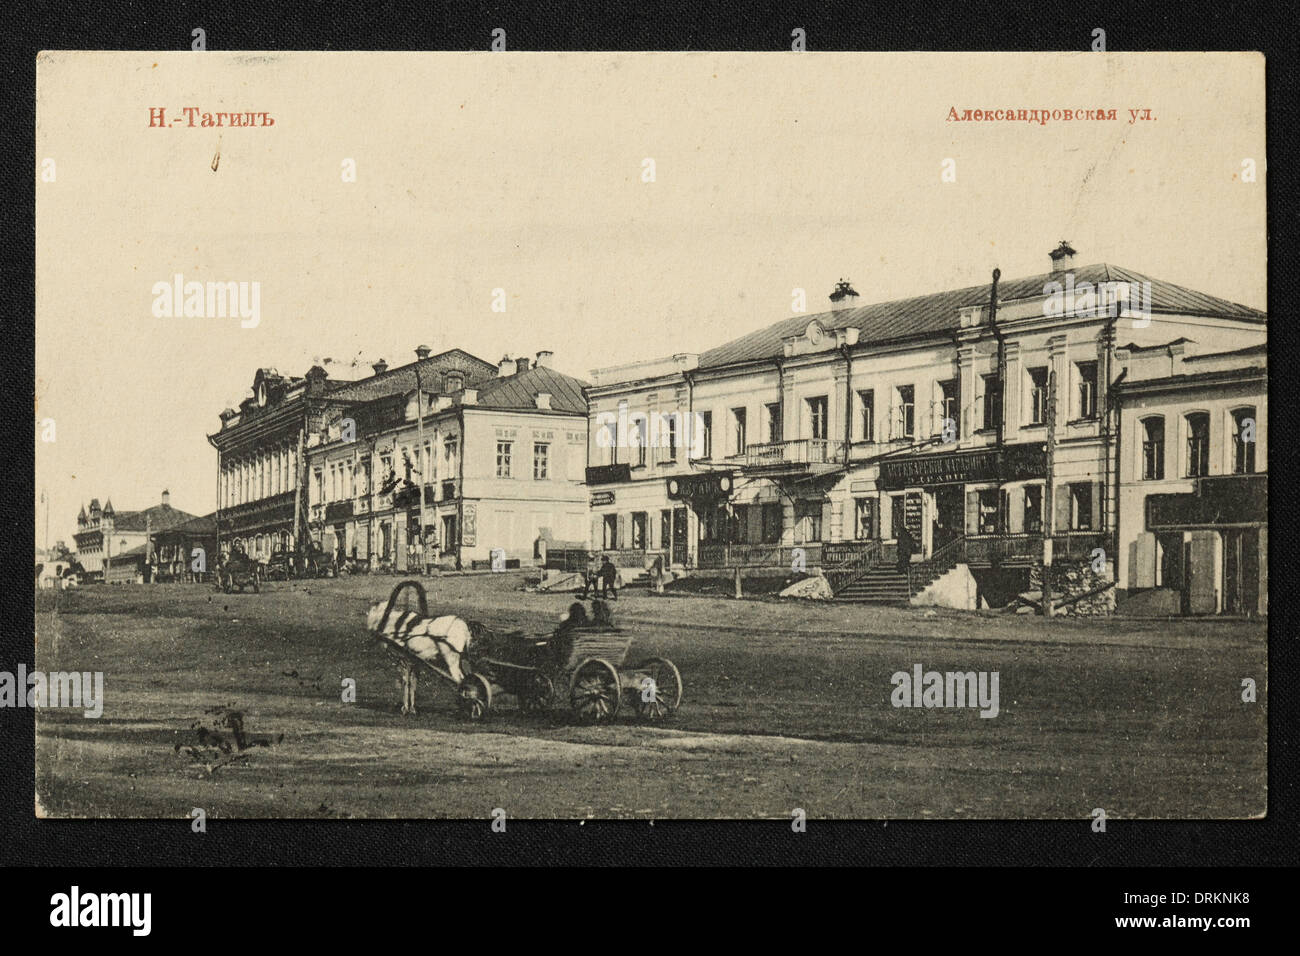 Alexandrovskaya Street in the town of Nizhny Tagil in the Ural Mountains, Russian Empire. Black and white vintage photograph by an unknown photographer dated from the beginning of the 20th century issued in the Russian vintage postcard published by M.A. Akhaimova. Text in Russian: Nizhny Tagil. Alexandrovskaya Street. Nizhny Tagil is a city in Sverdlovsk region, Russia, located some 120 km from Yekaterinburg. Courtesy of the Azoor Postcard Collection. Stock Photo